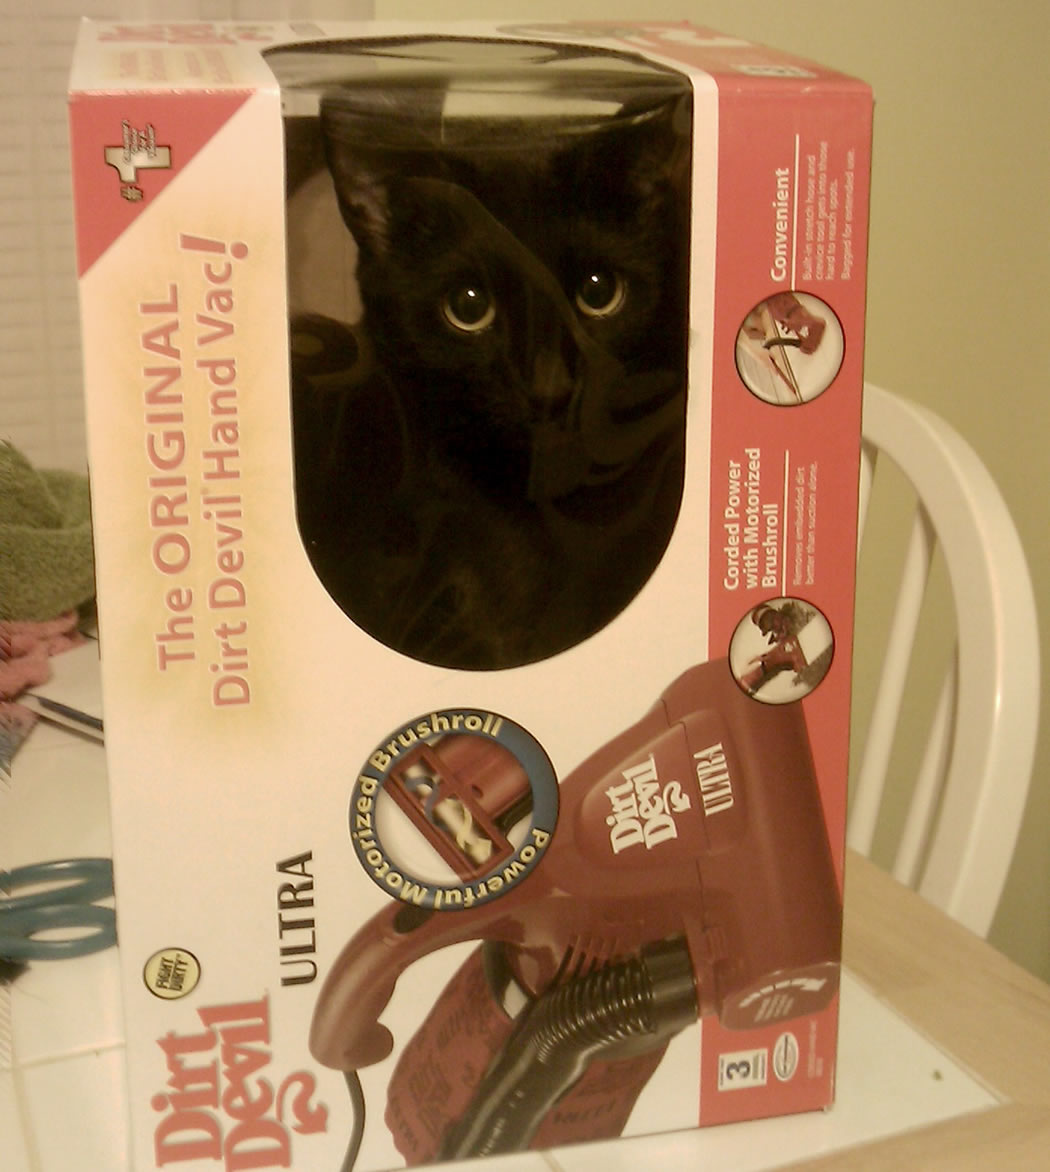 A black cat sitting inside a small cardboard box for a Dirt Devil handheld vacuum, looking out through the clear plastic window in the front of the box, on top of a kitchen table.